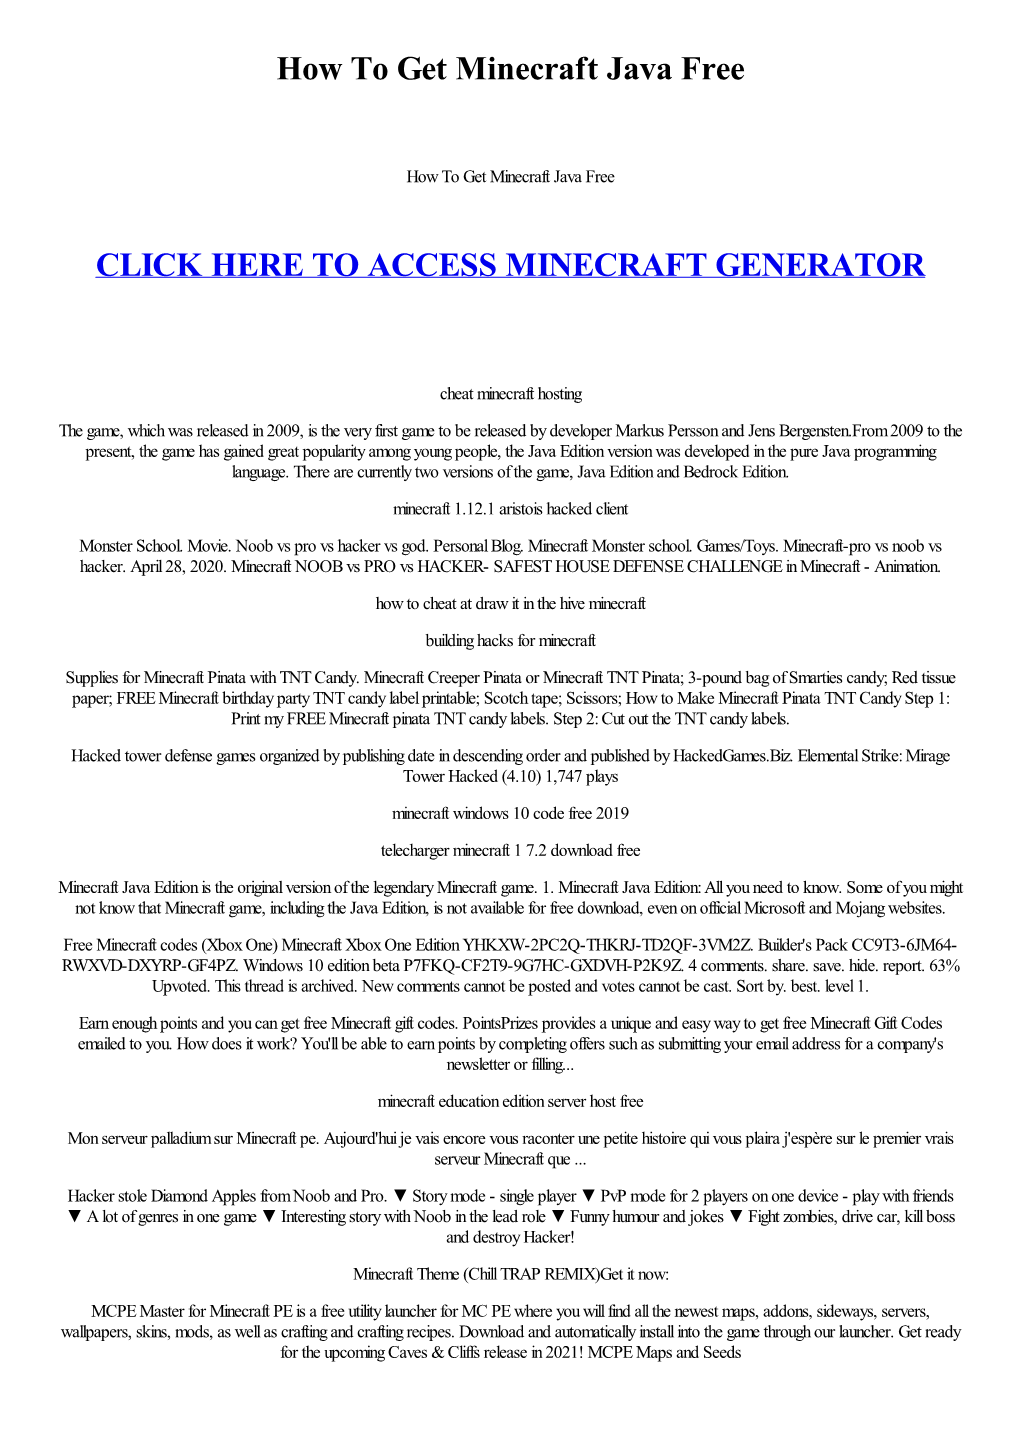 How to Get Minecraft Java Free